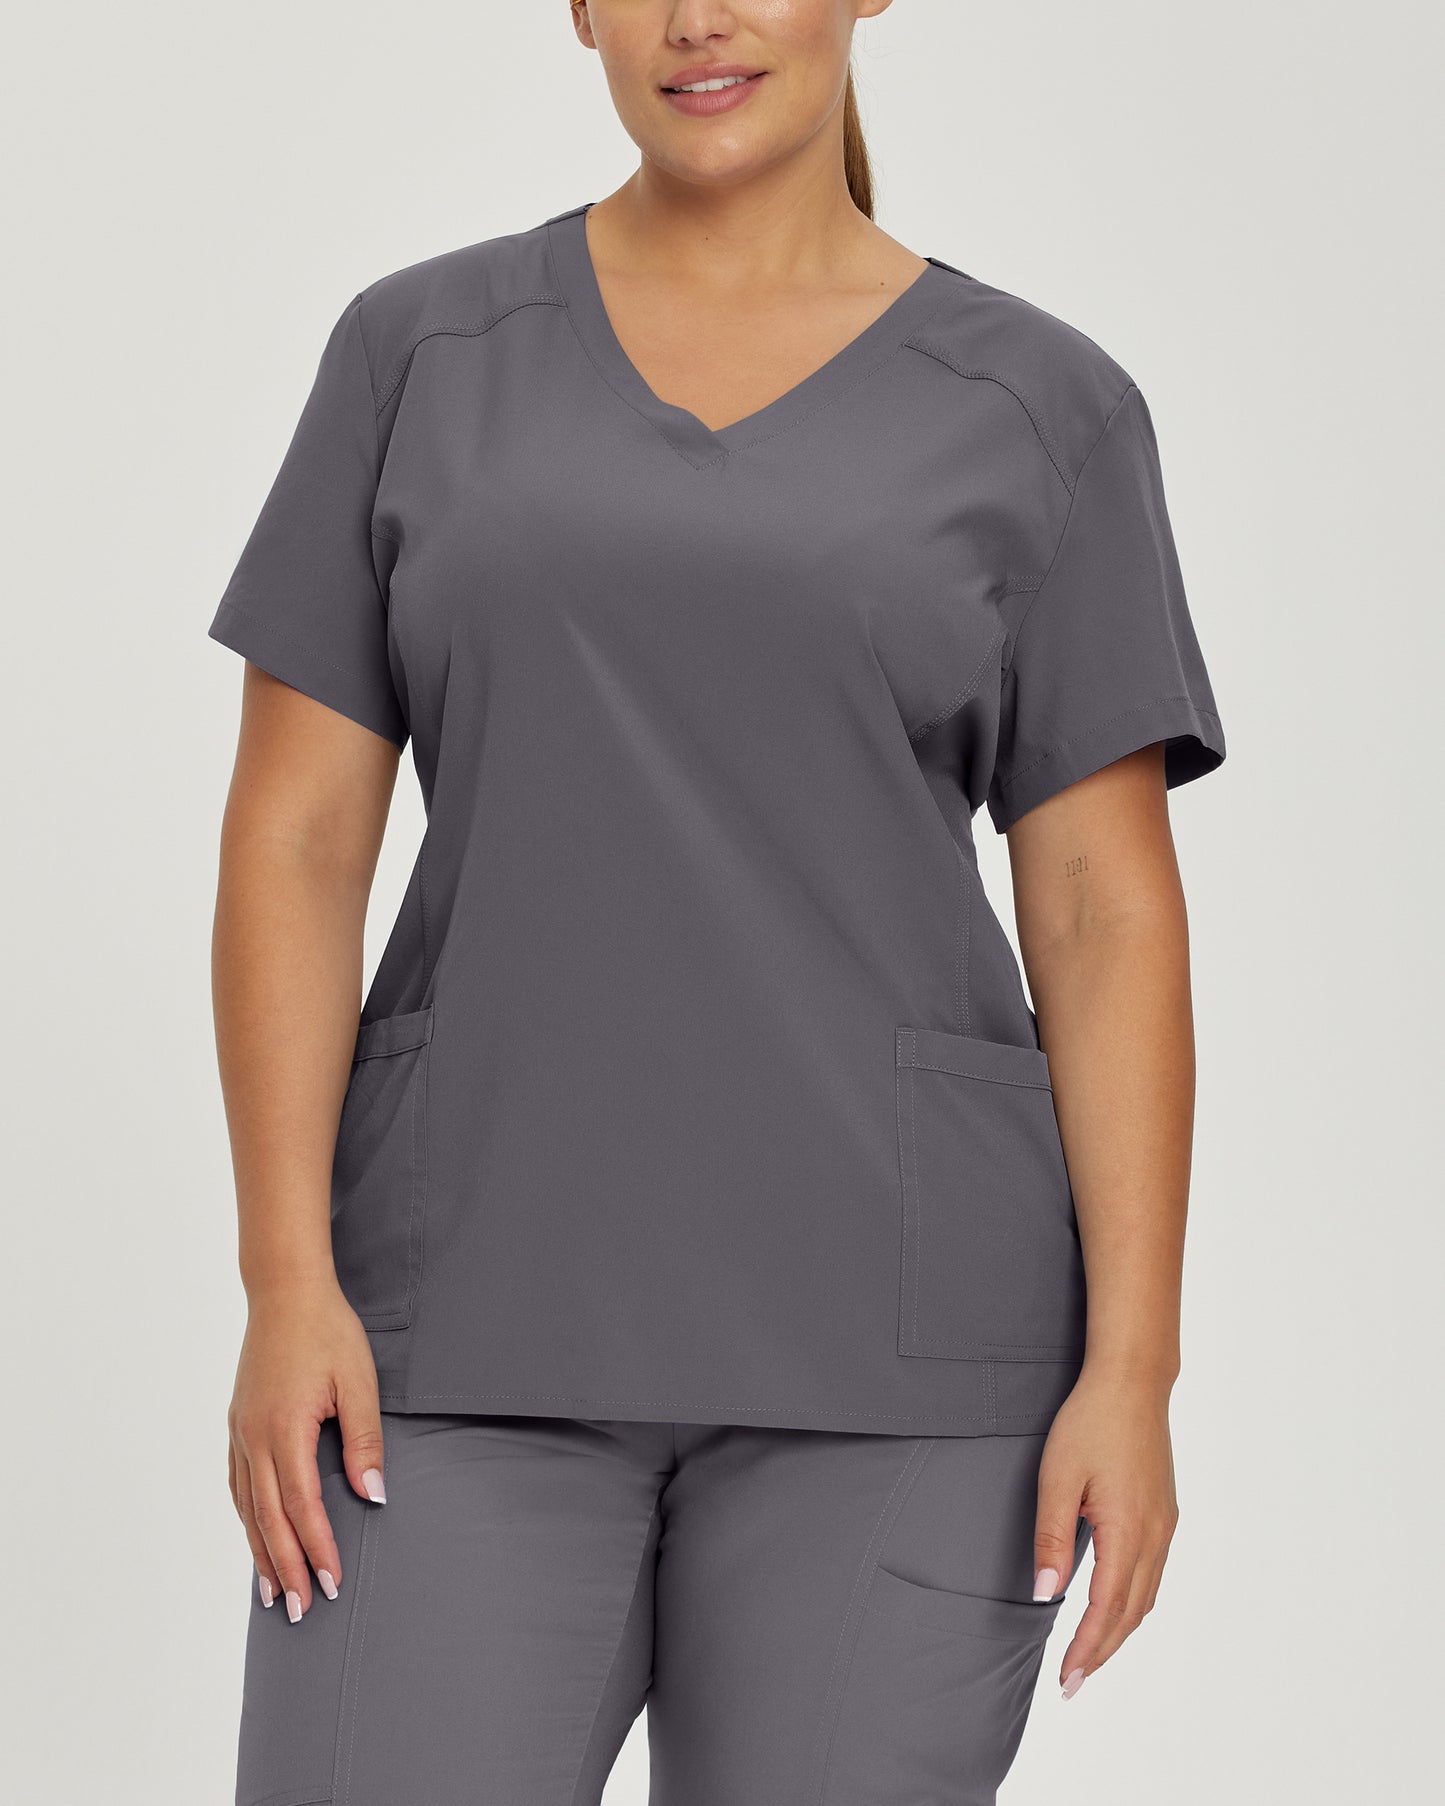 Women's V-neck top with two pockets - FIT - 785